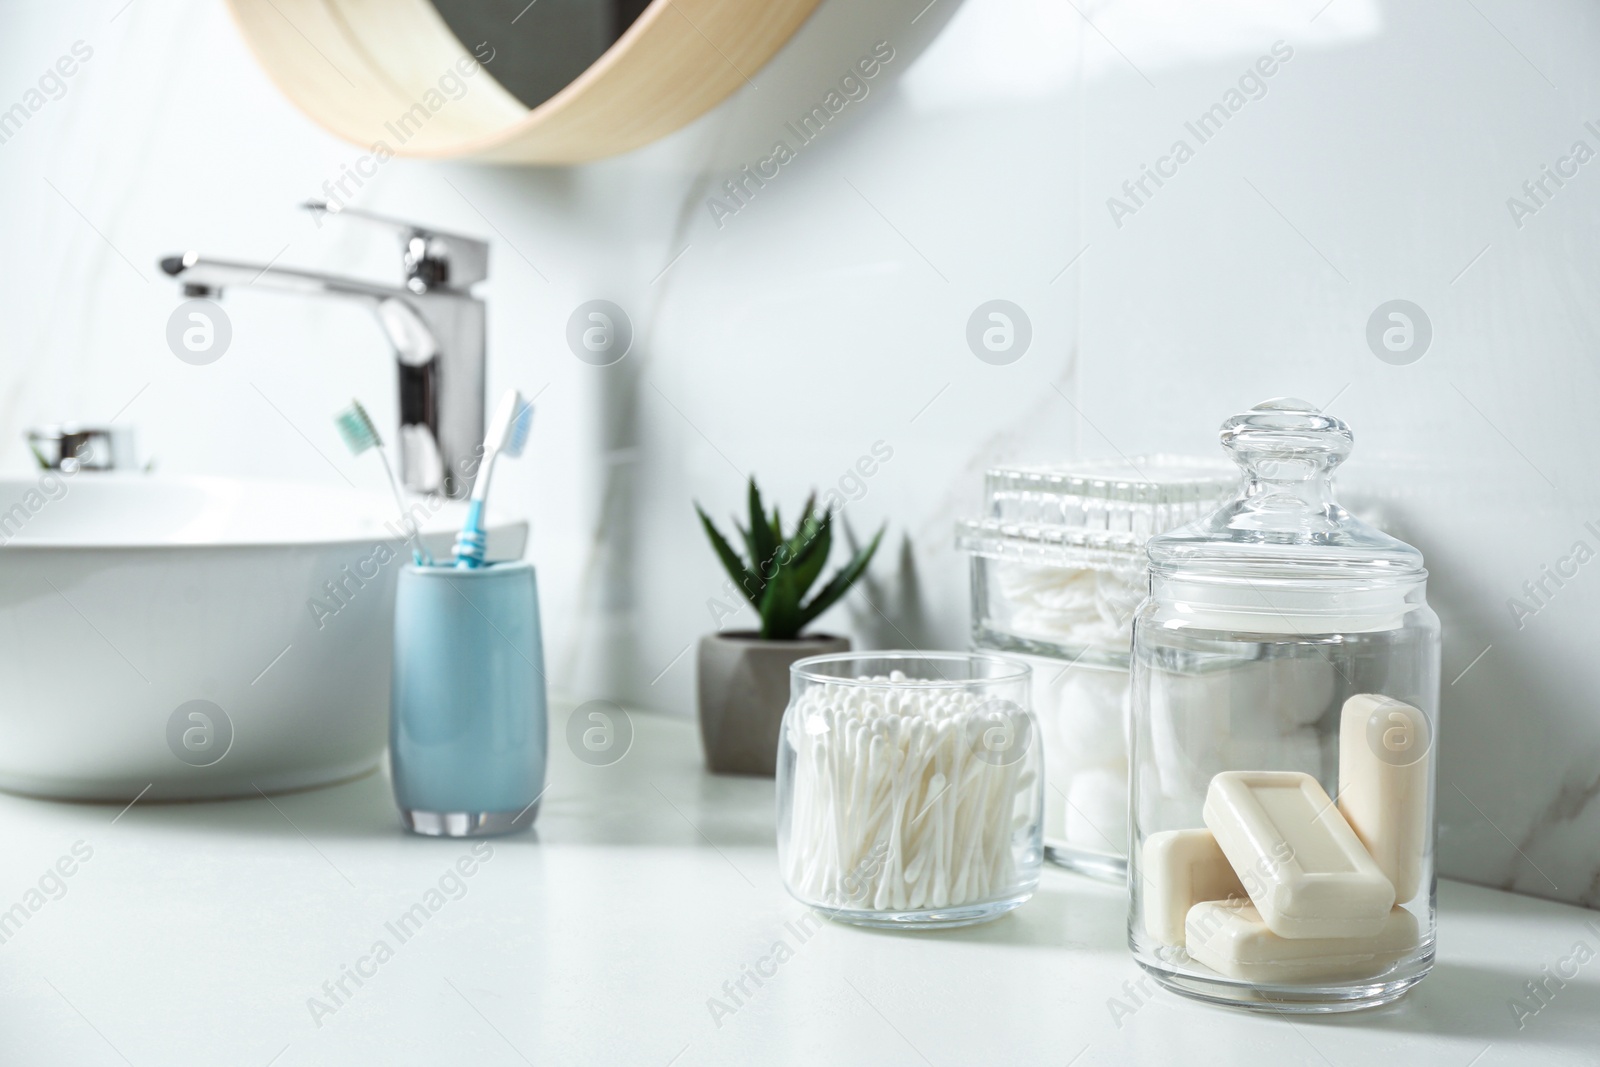 Photo of Cotton swabs and soap bars on white countertop in bathroom